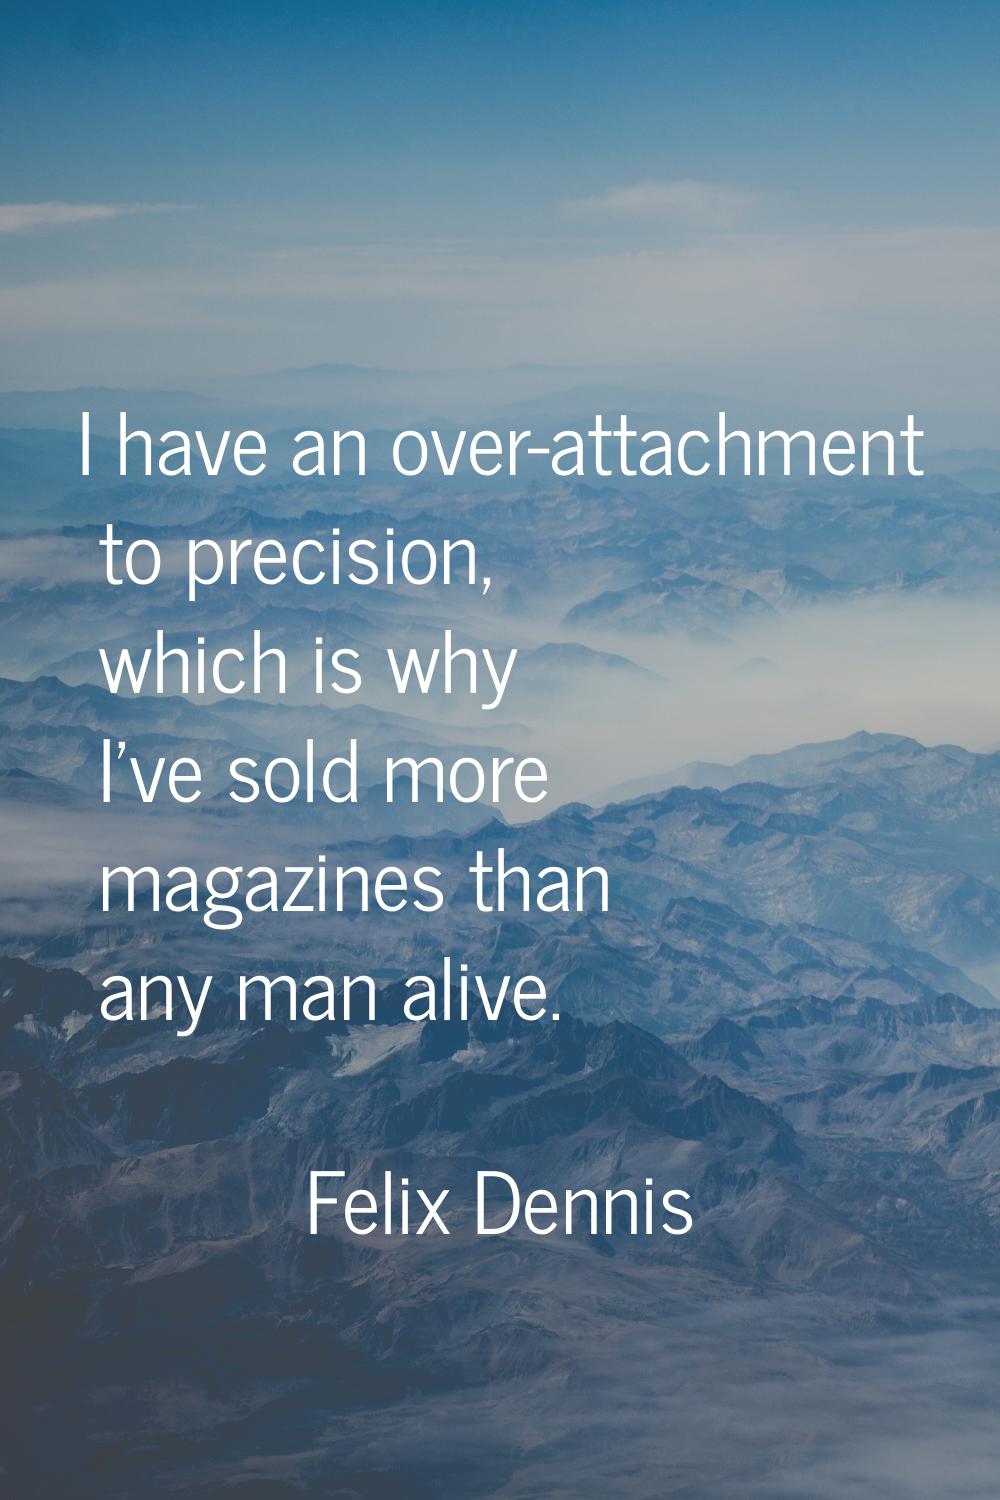 I have an over-attachment to precision, which is why I've sold more magazines than any man alive.